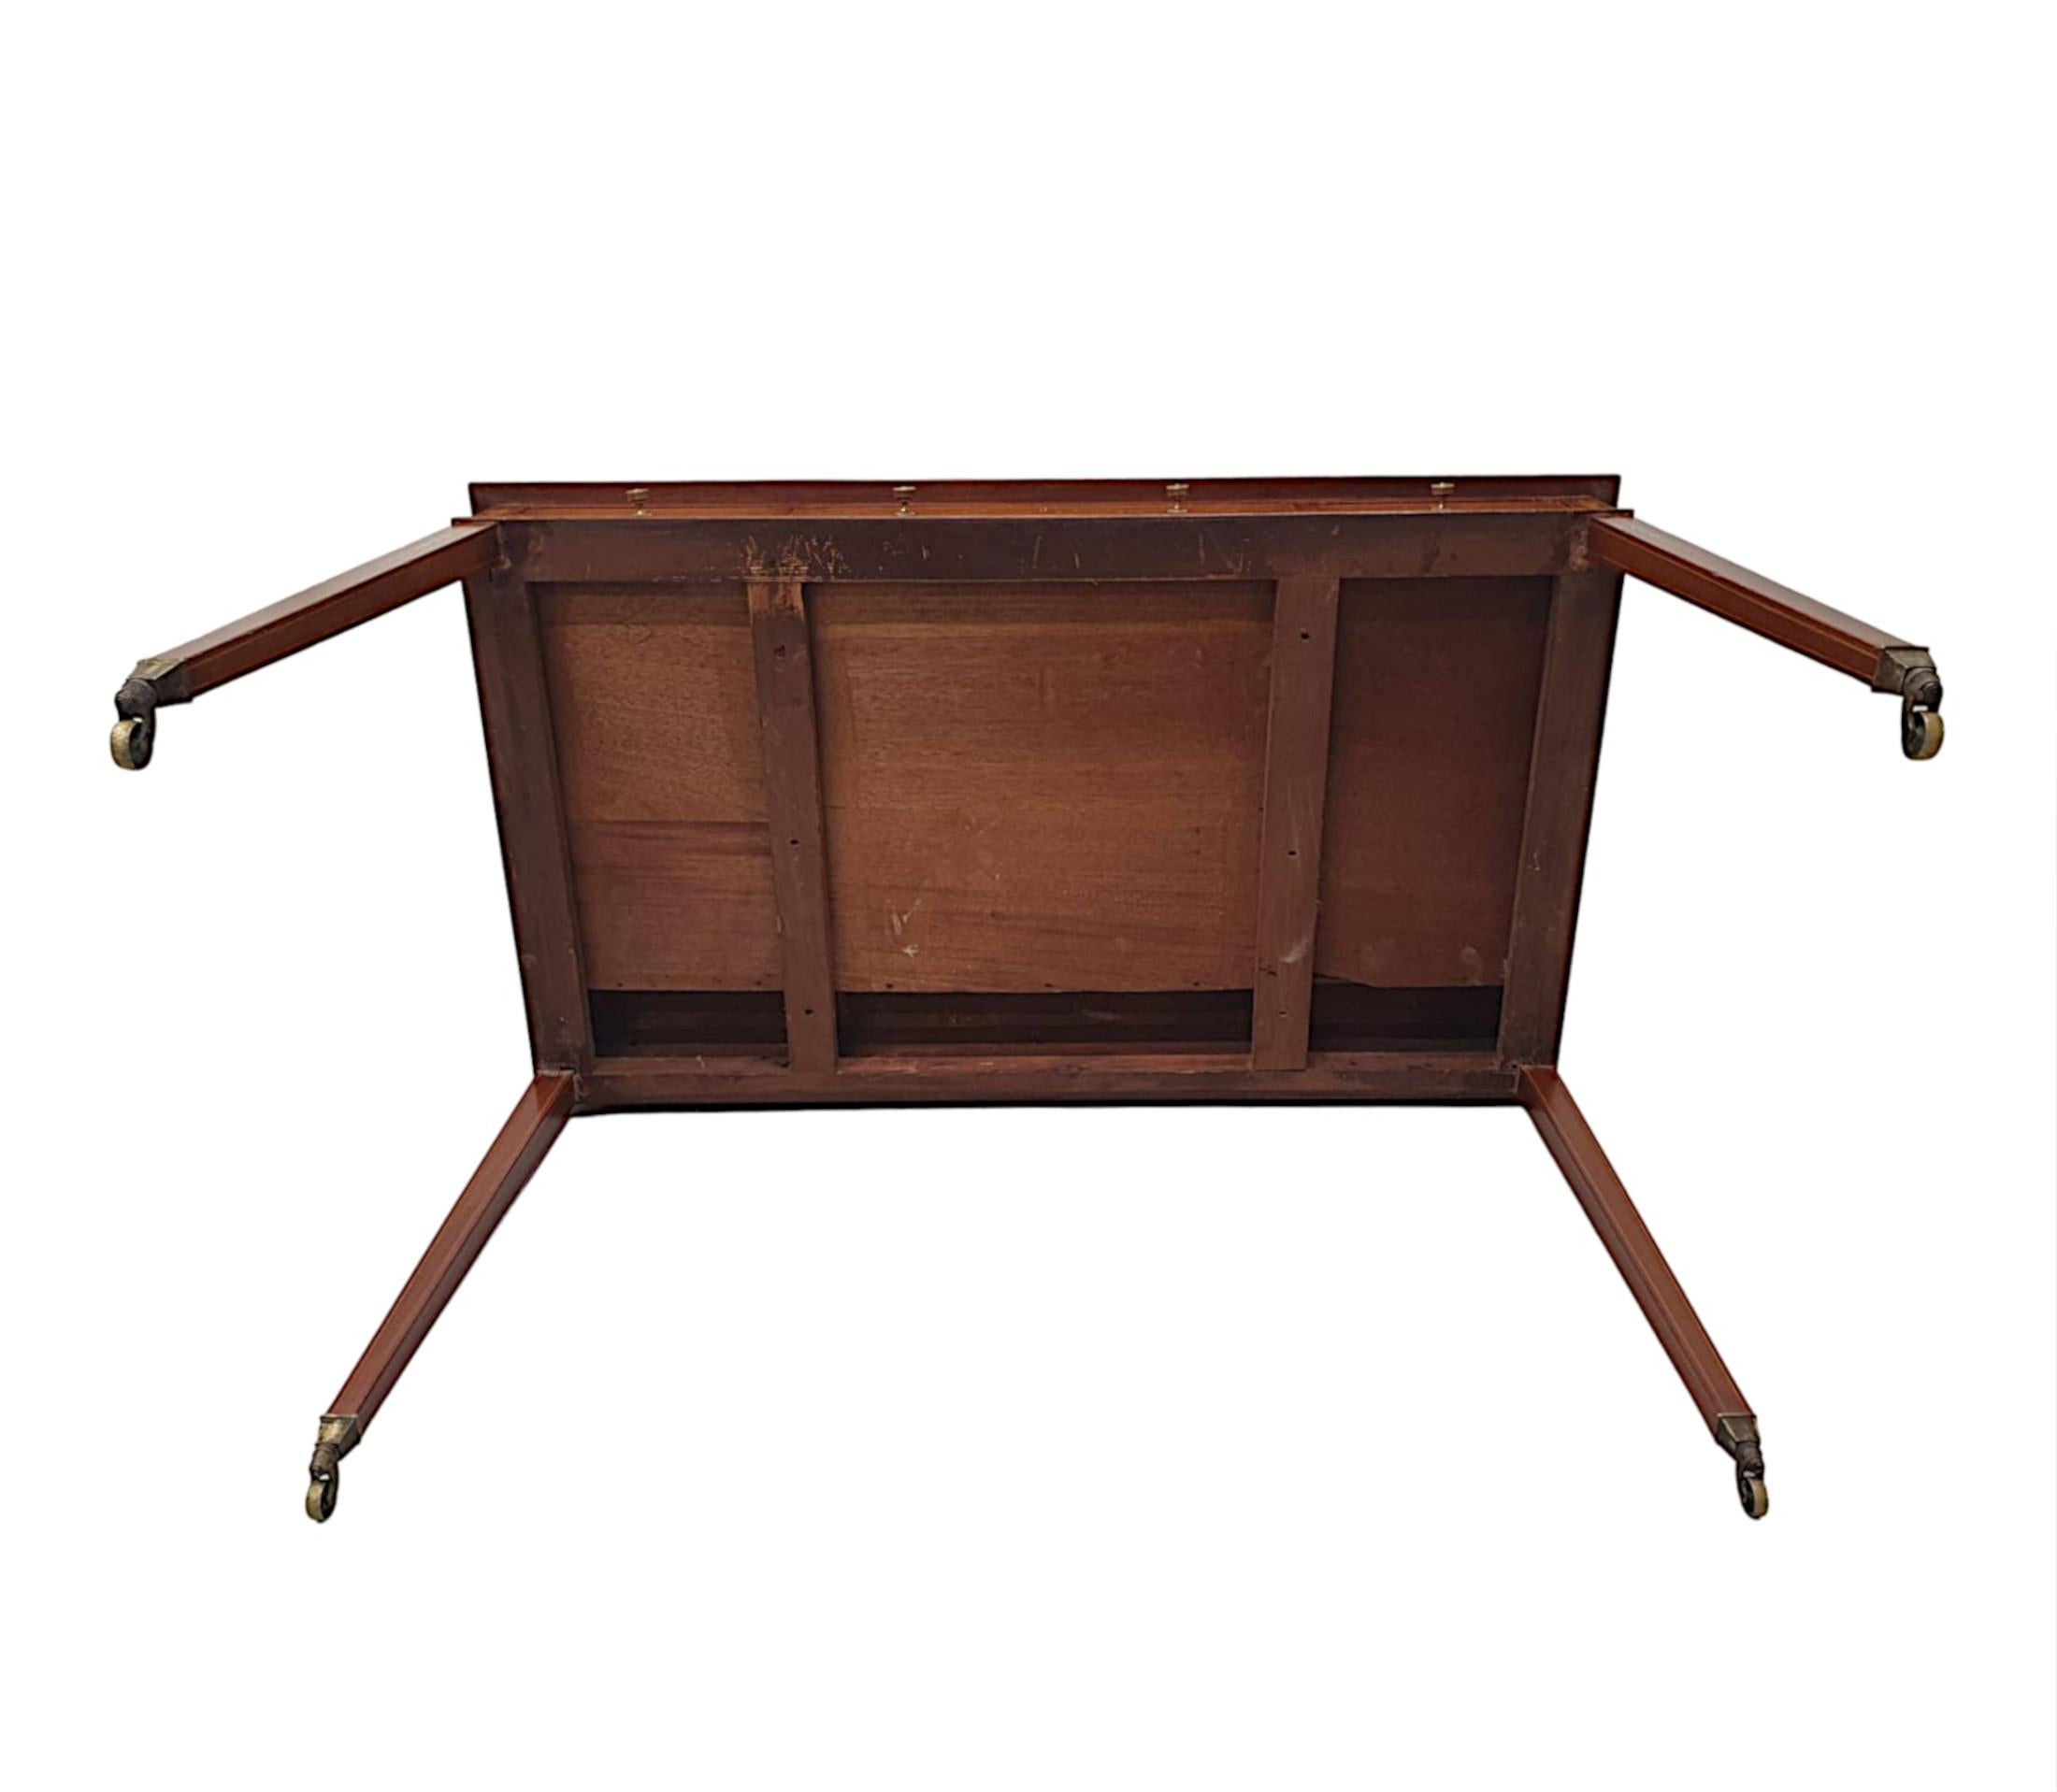 Very Fine Edwardian Desk Attributed to Edward and Roberts For Sale 4